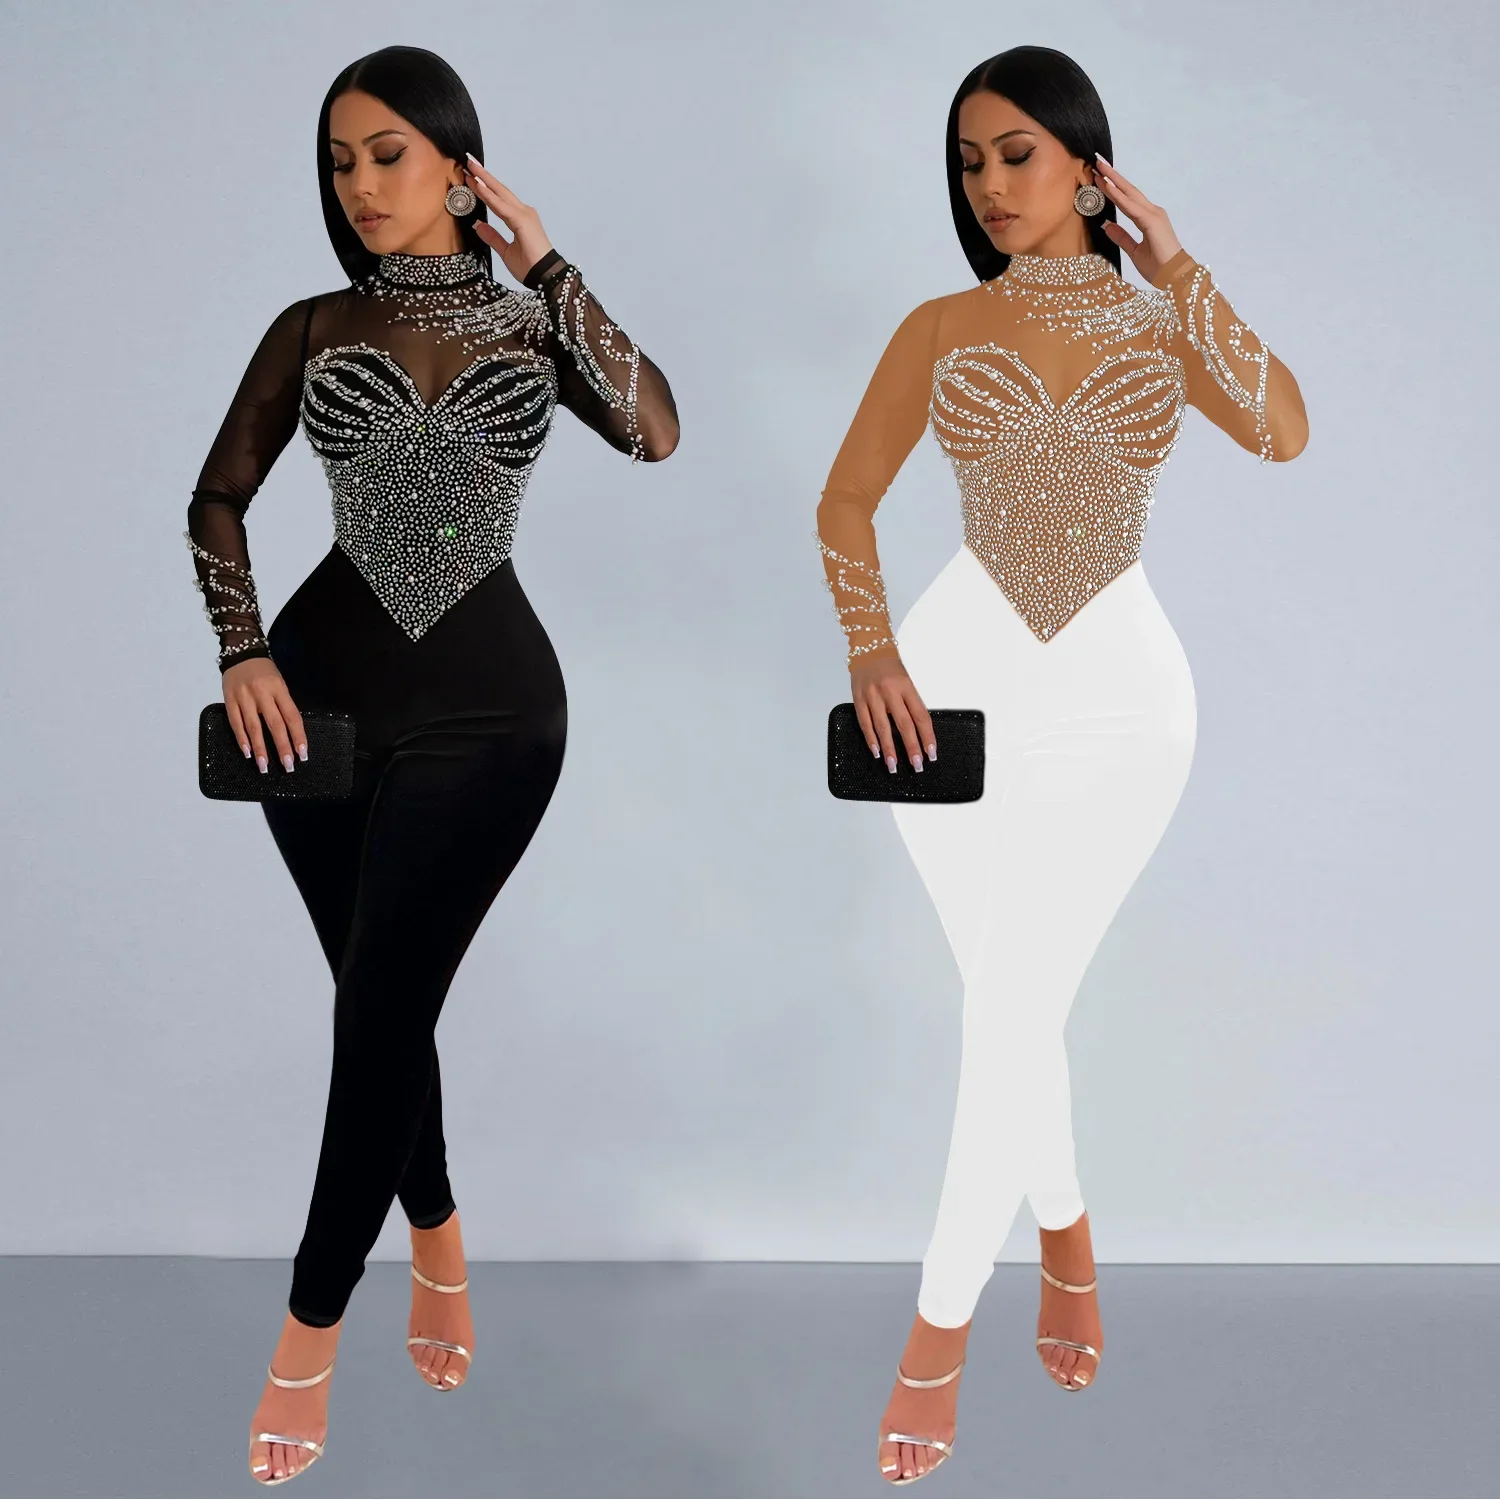 

O-neck Full Sleeve Women Jumpsuits Mesh Hollow Out Rhinestone Rompers One Piece Sexy Perspective Hot Drilling Outfits